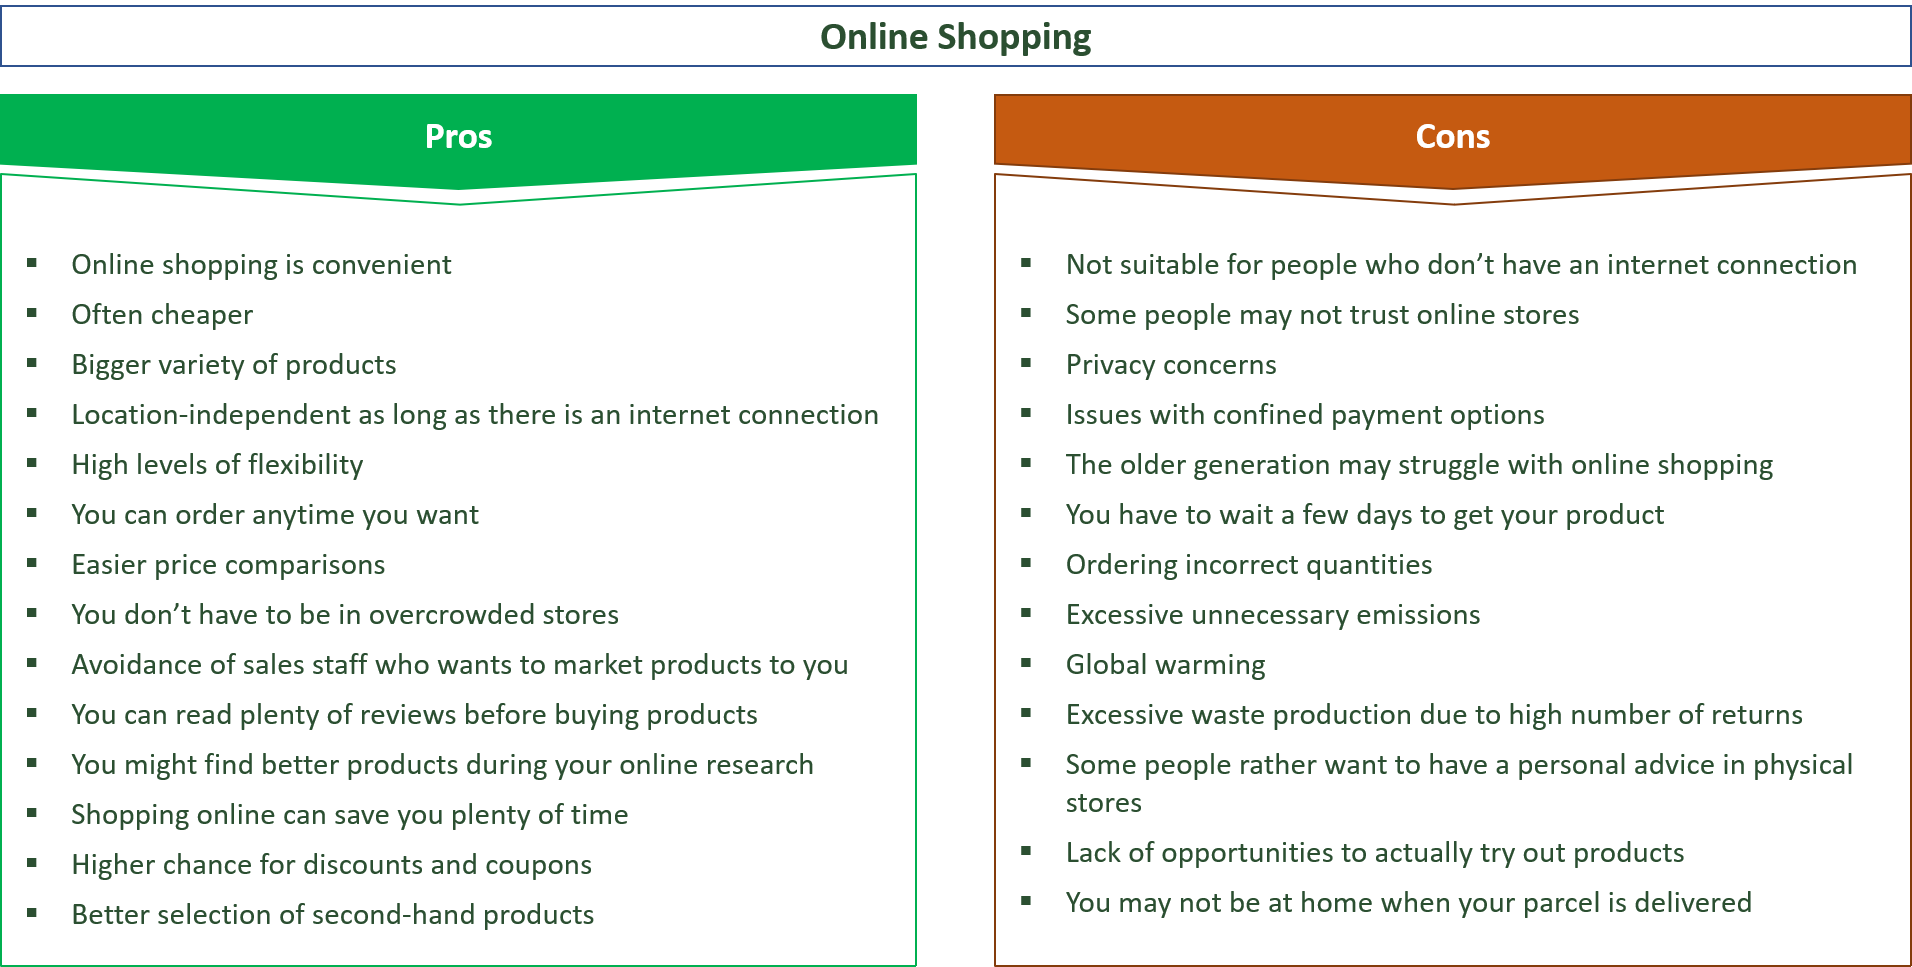 advantages and disadvantages of online shopping